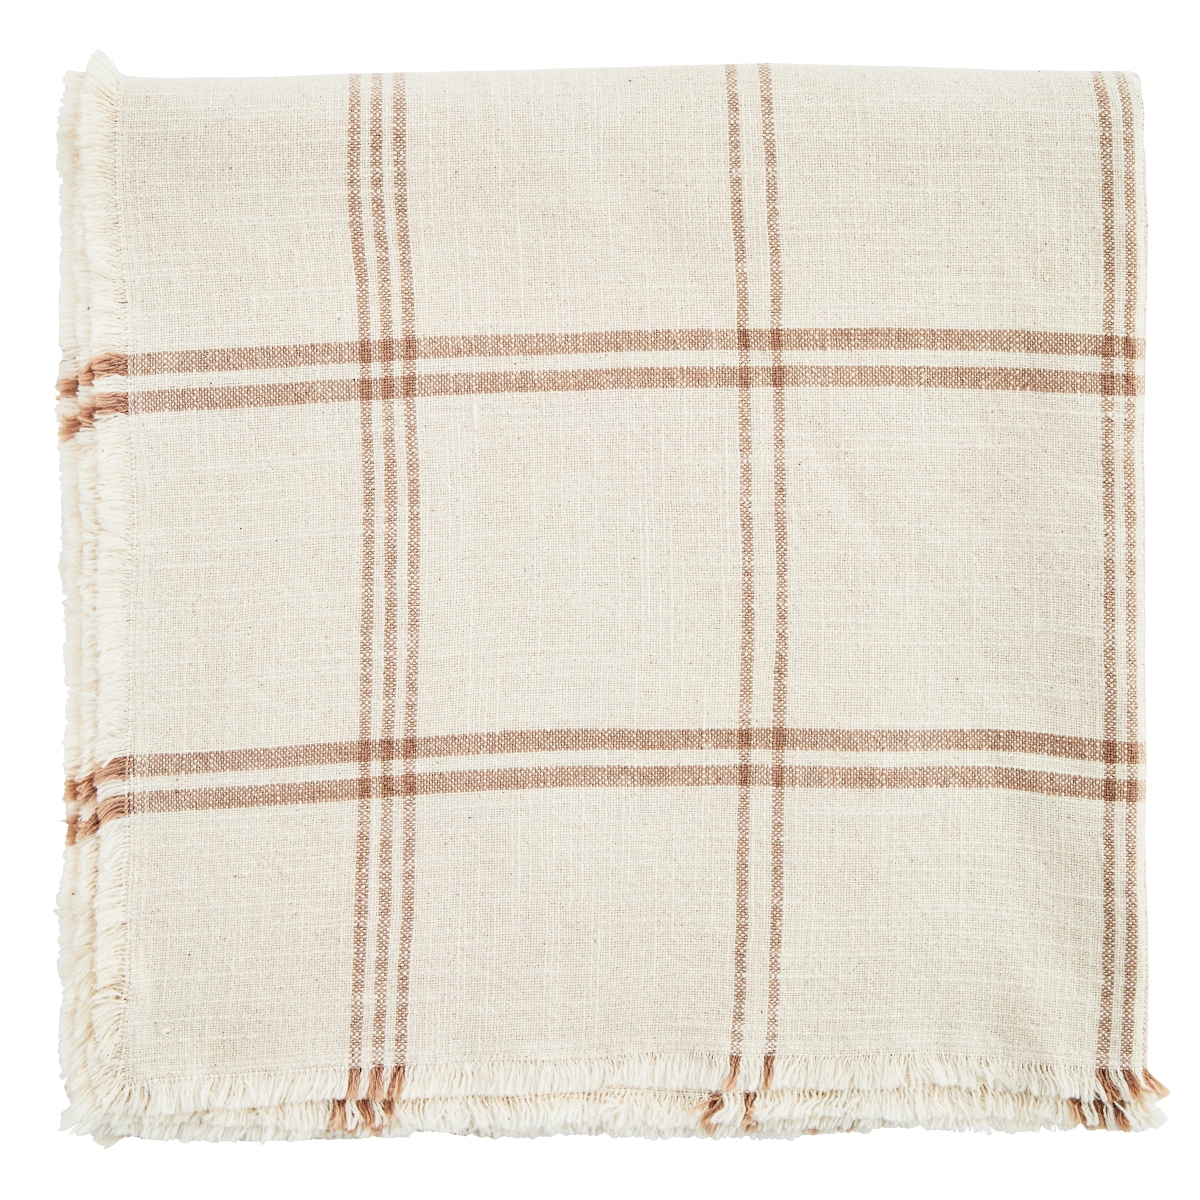 Checked Table Cloth w. Fringes Ecru/Nougat